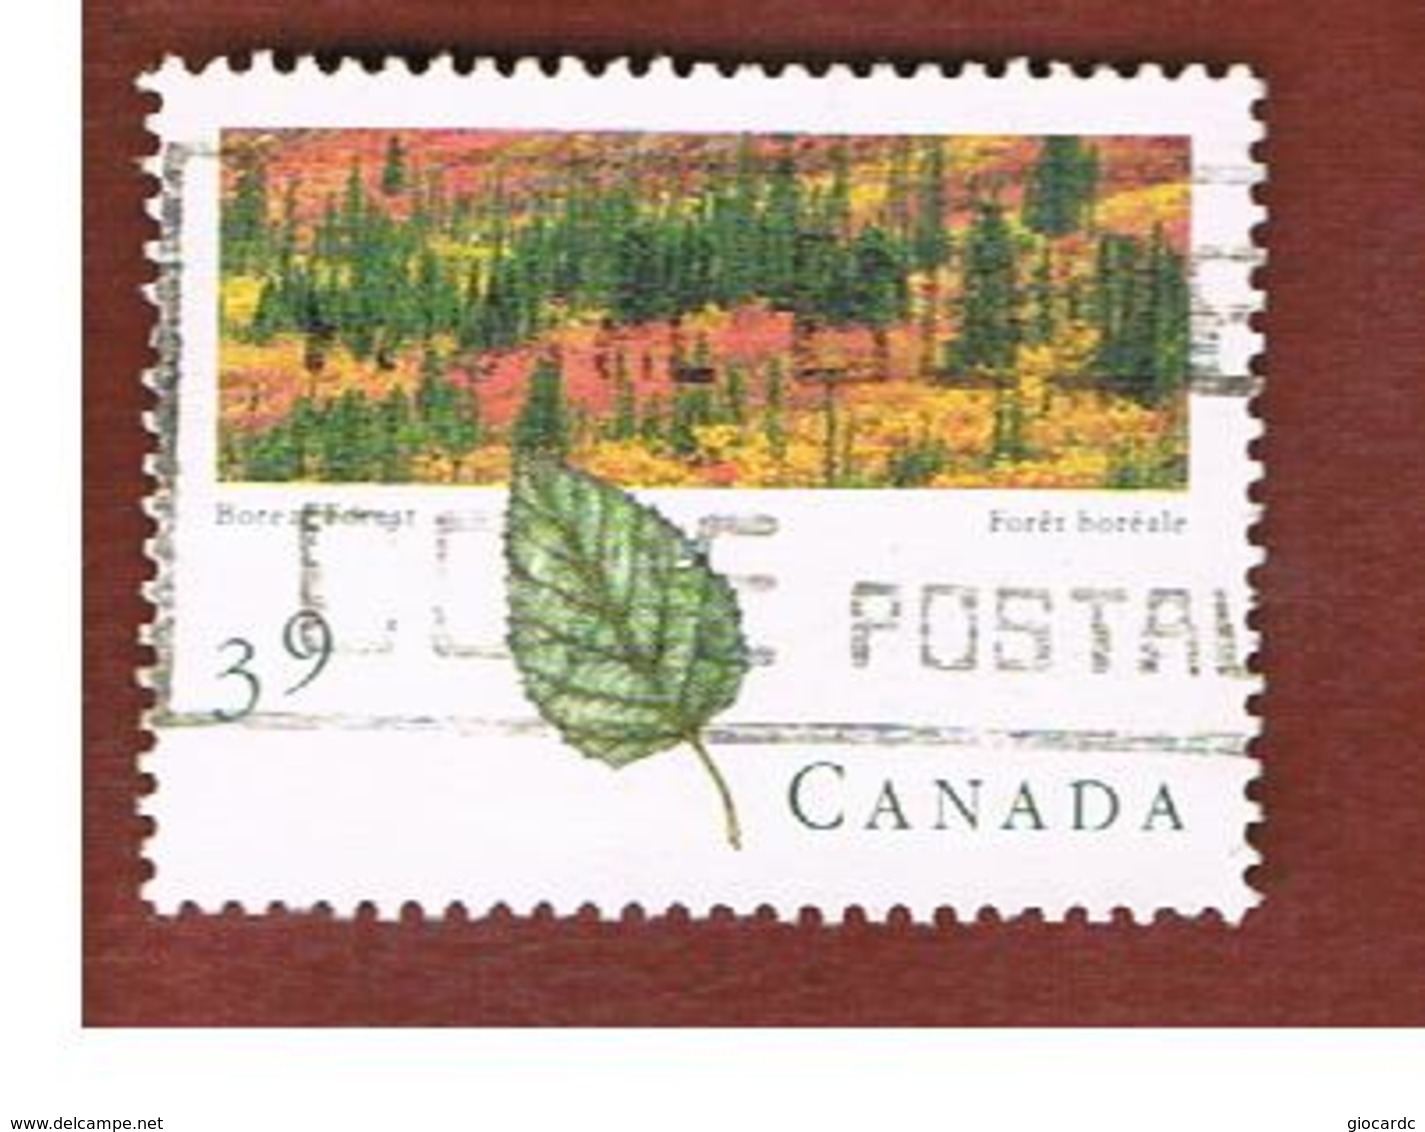 CANADA - SG 1397 - 1990  CANADIAN FORESTS: BOREAL       -  USED - Used Stamps